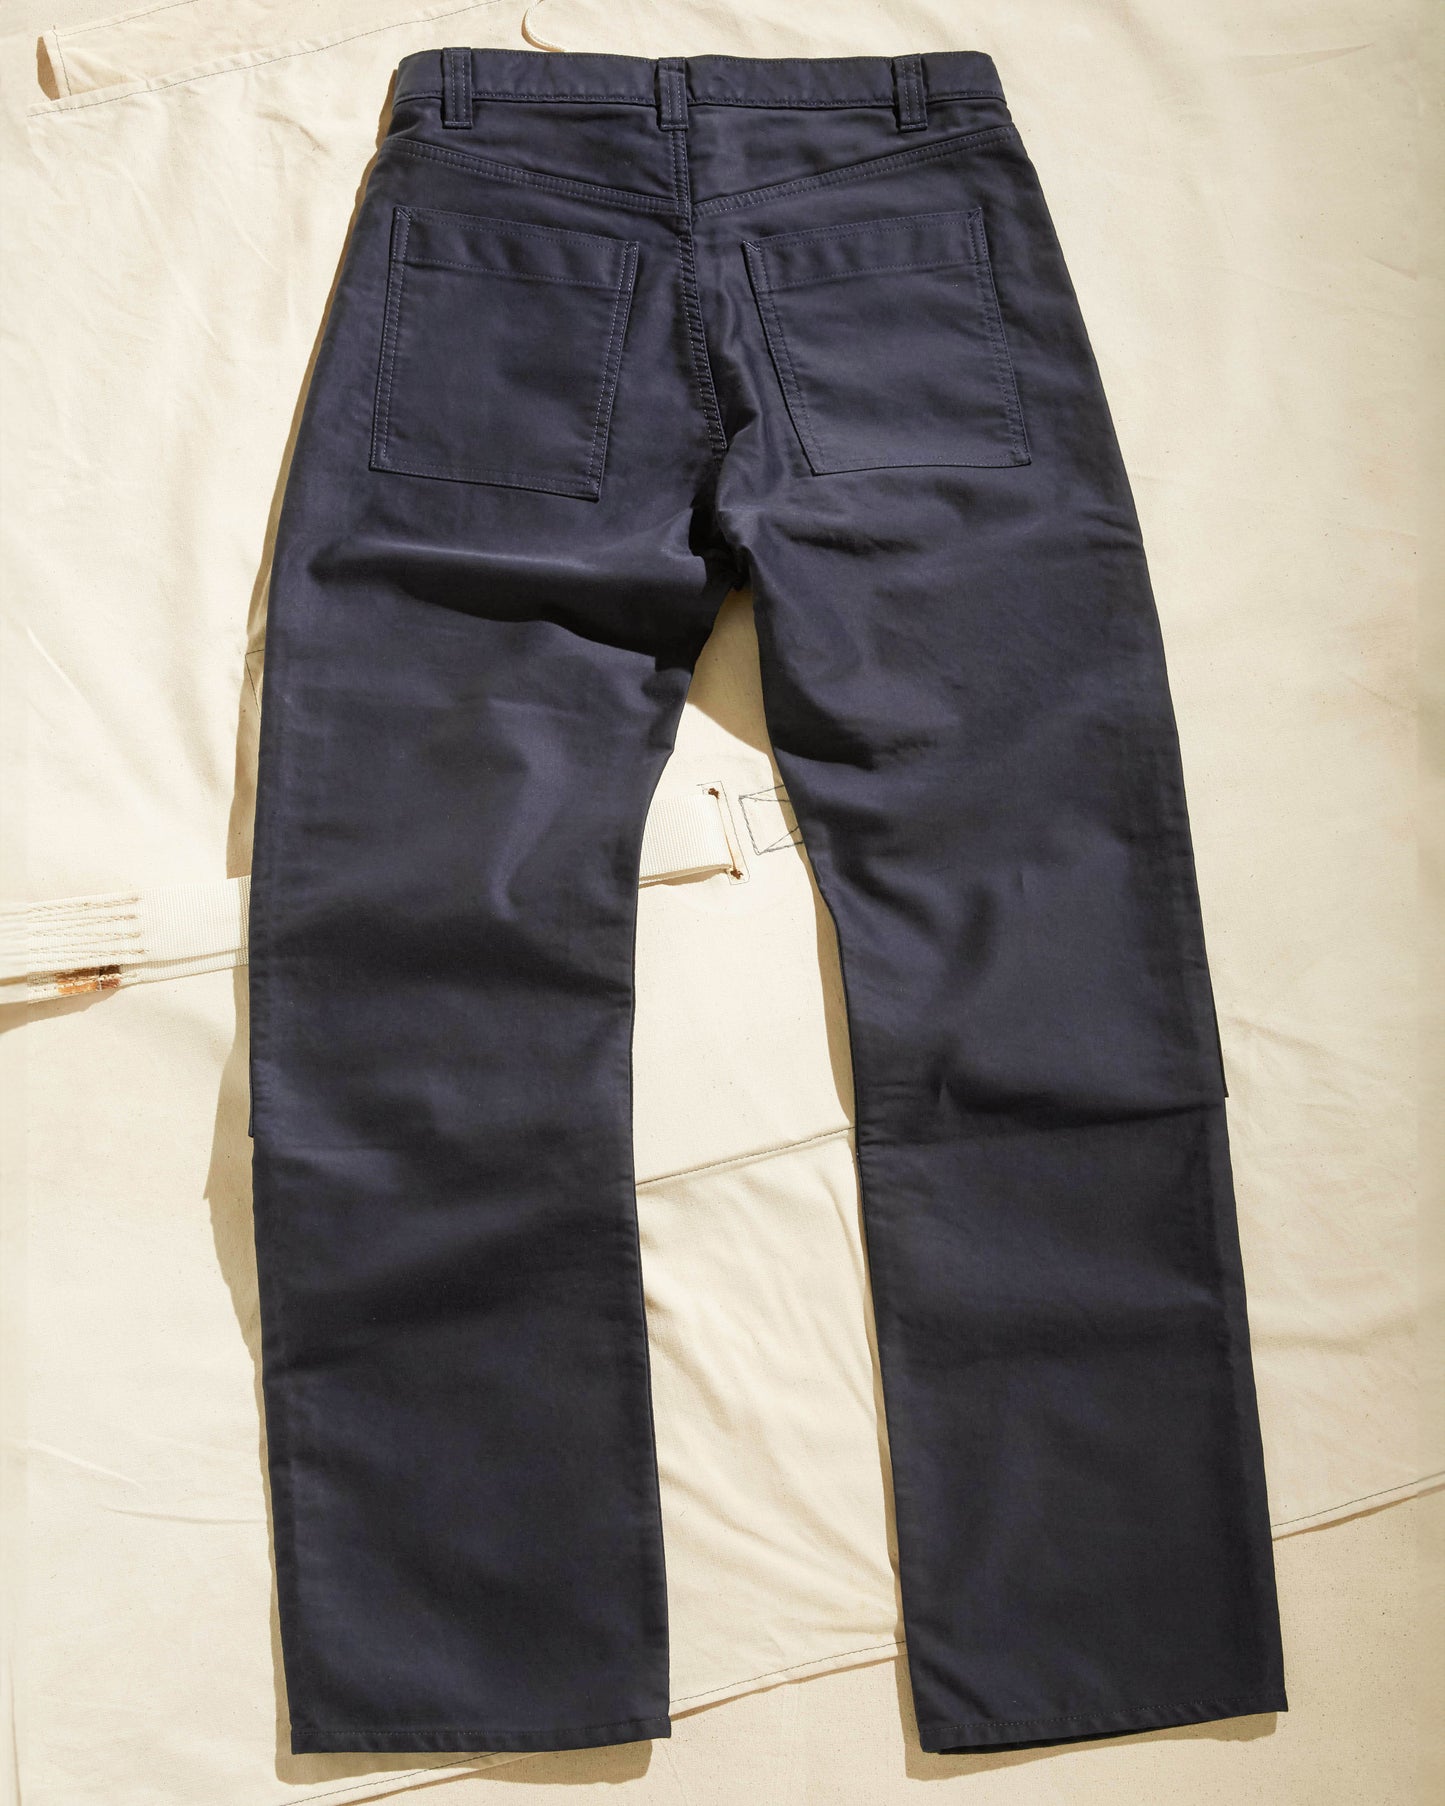 TR-00002-P7 - Knee Patch Work Jean